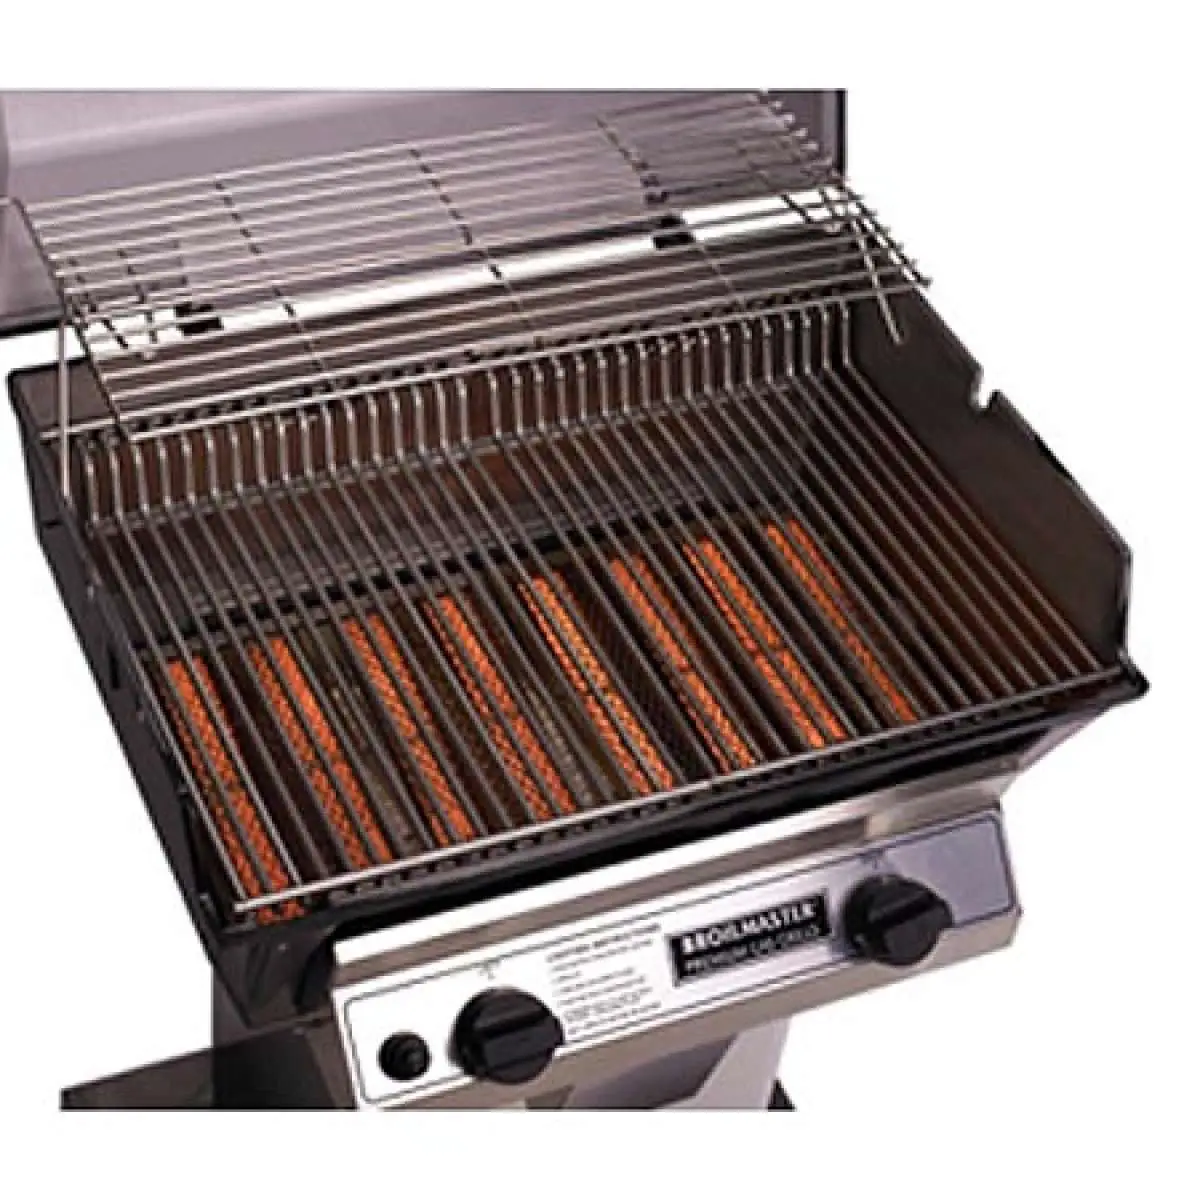 Broilmaster Premium Infrared R3 Gas Barbecue Grill Head ...